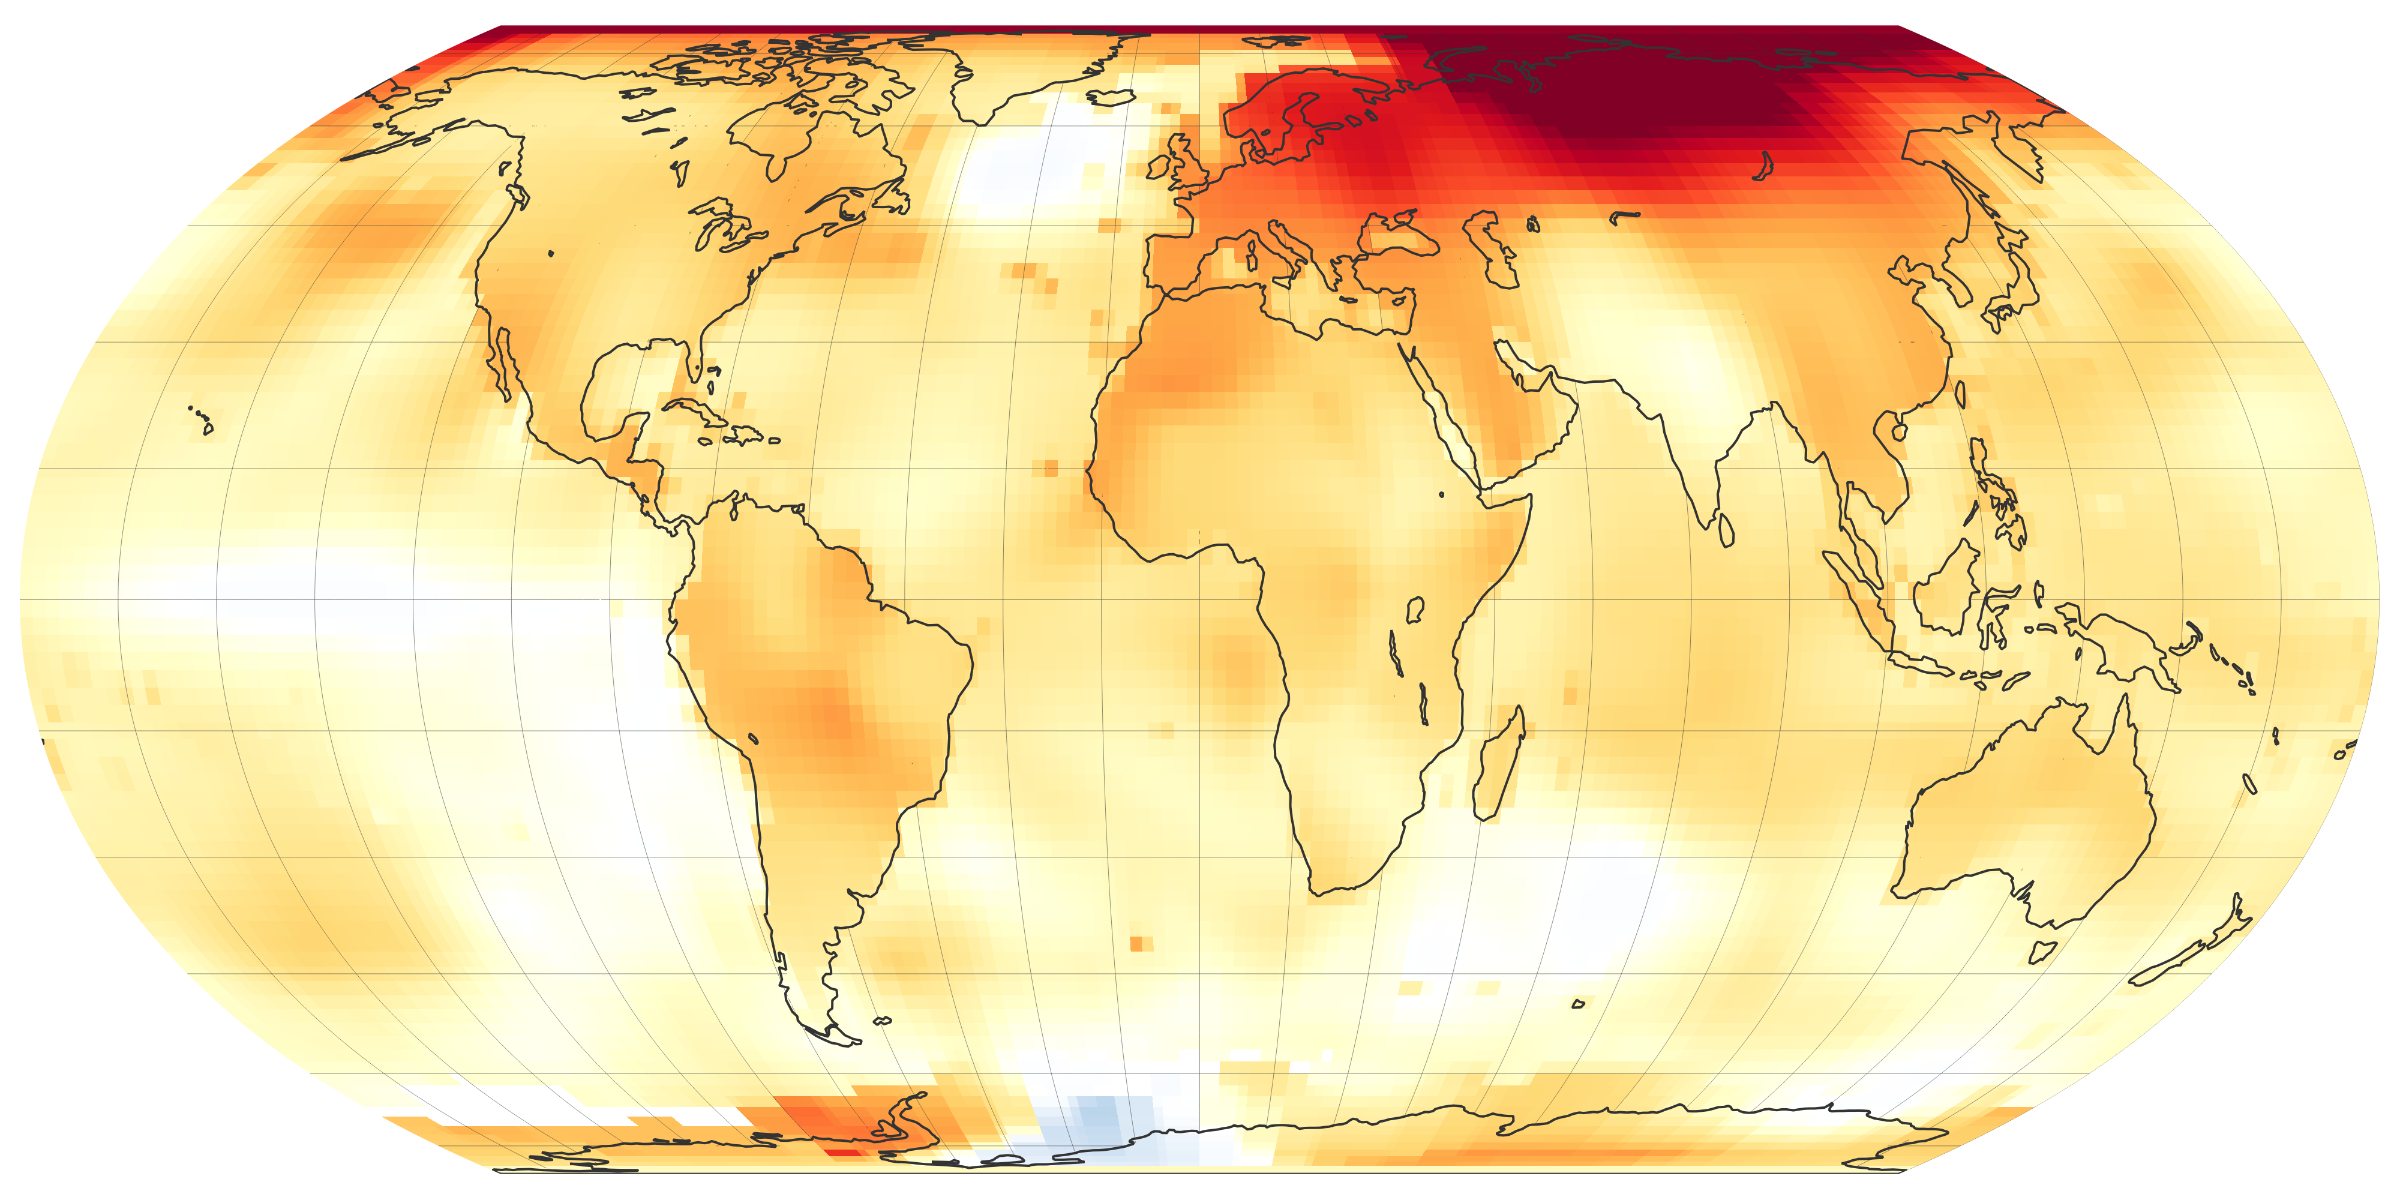 2020 Tied for Warmest Year on Record - related image preview